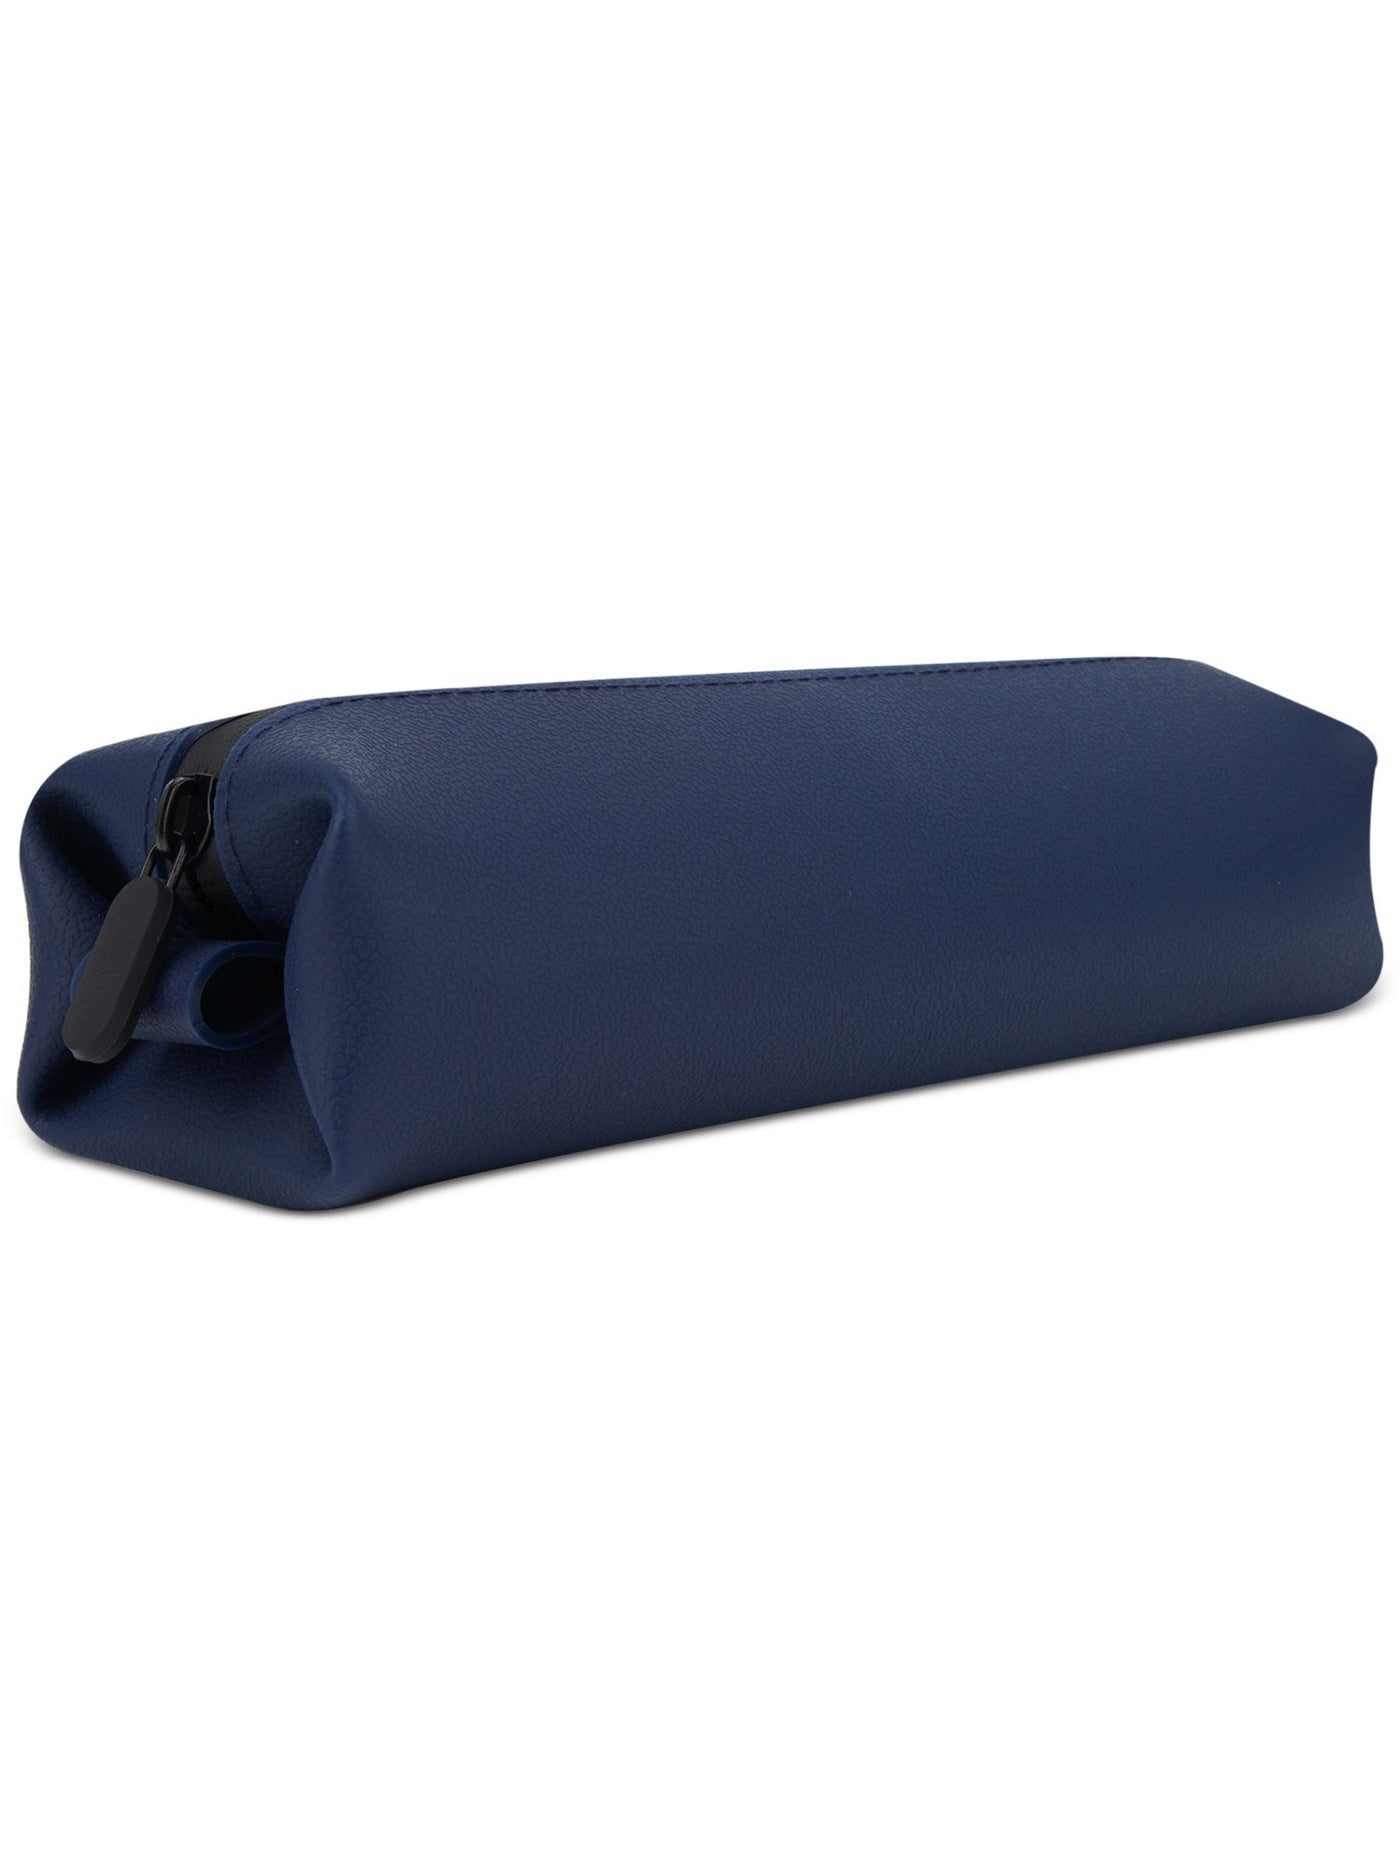 BESPOKE Men's Navy Silicone Water & Spill Protection Side Pack